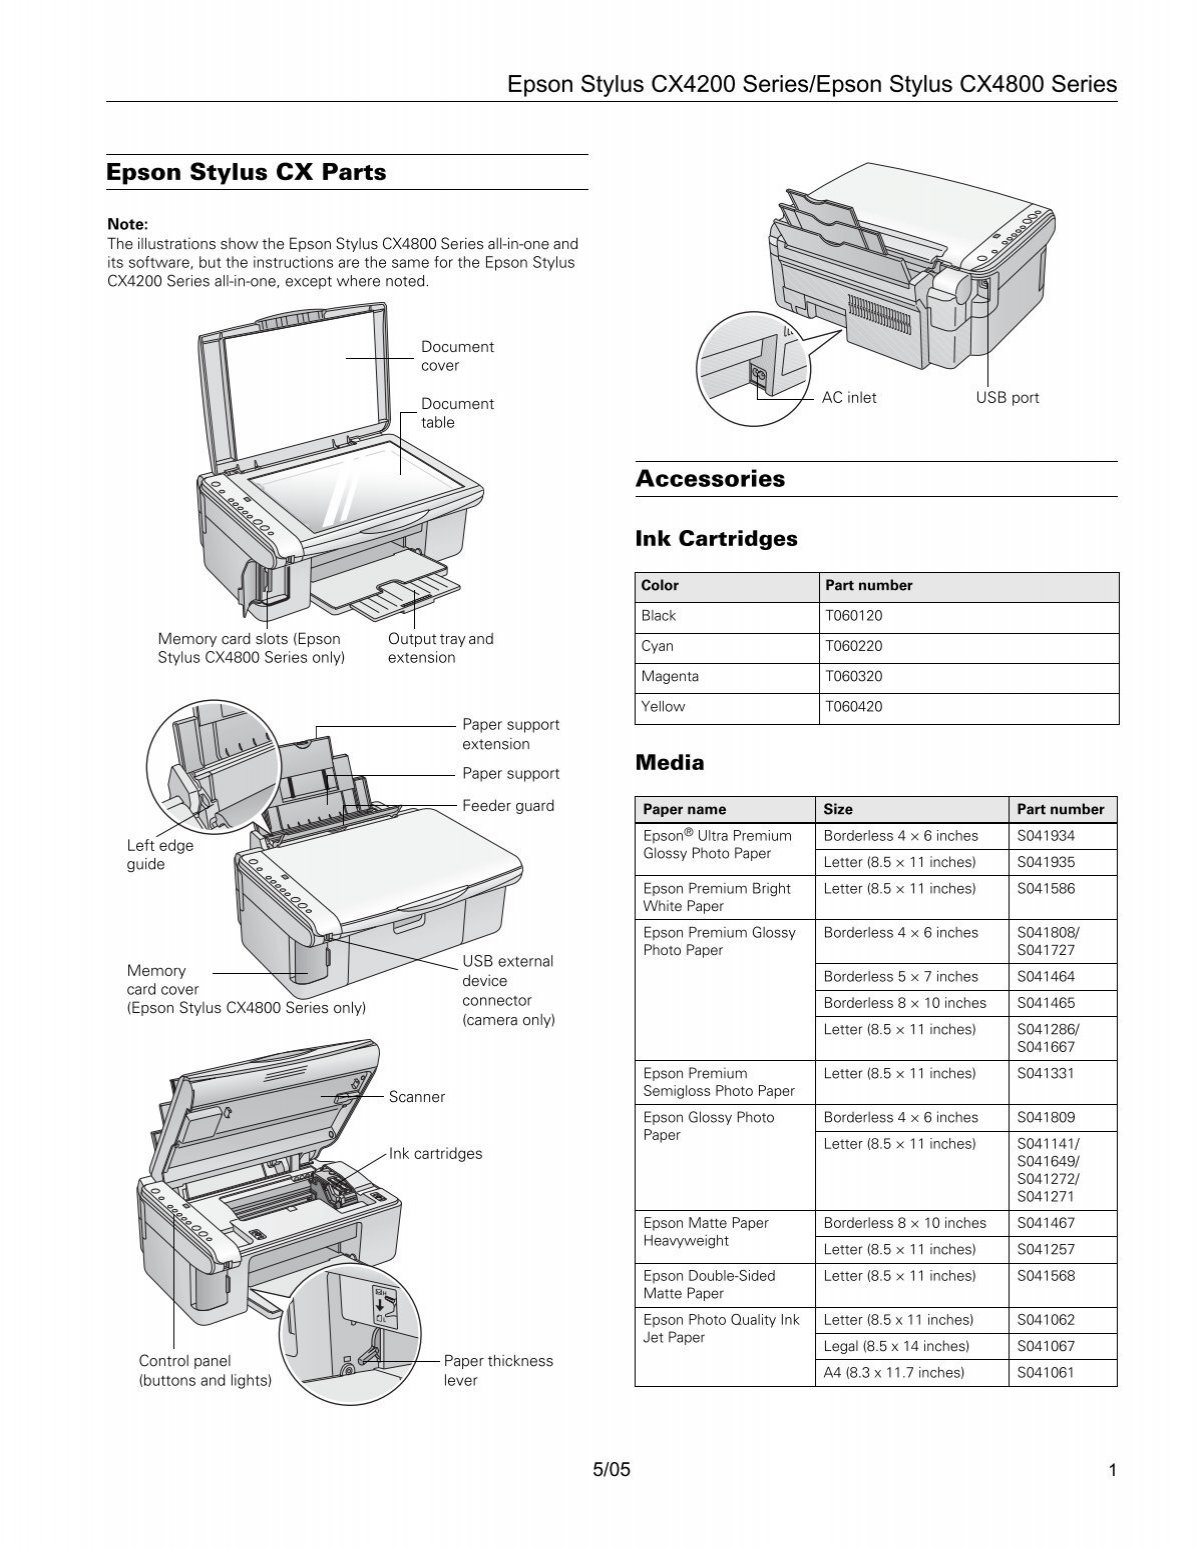 Epson Epson Stylus Cx4800 All In One Printer Product Information Guide 5501